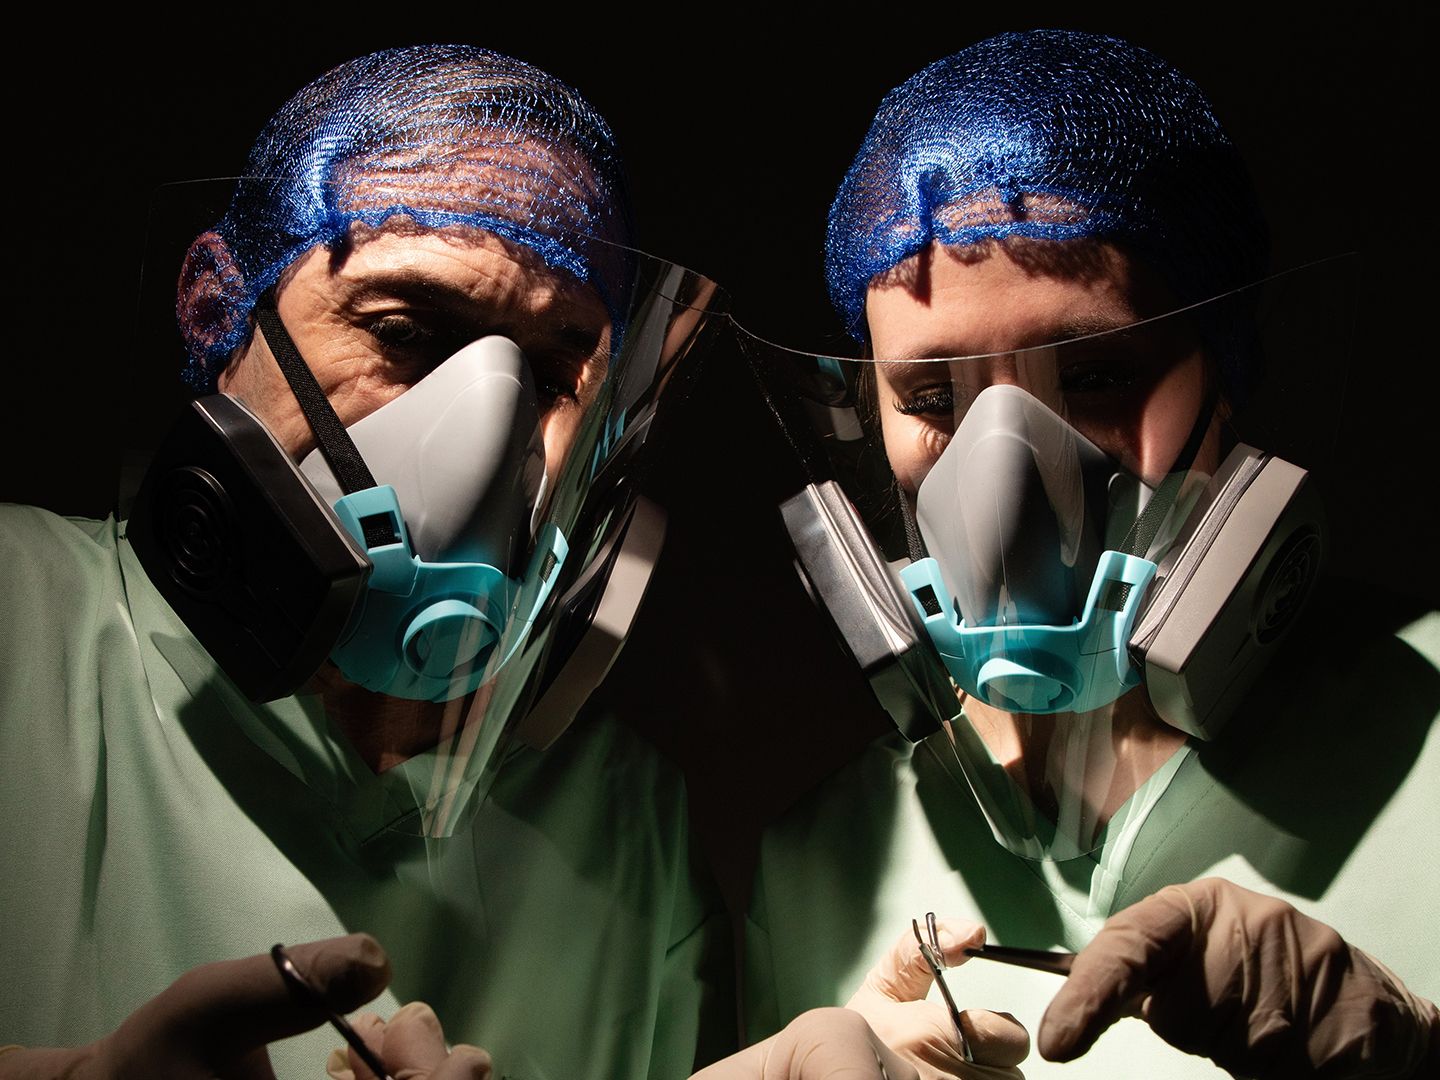 image: two workers with filtration masks